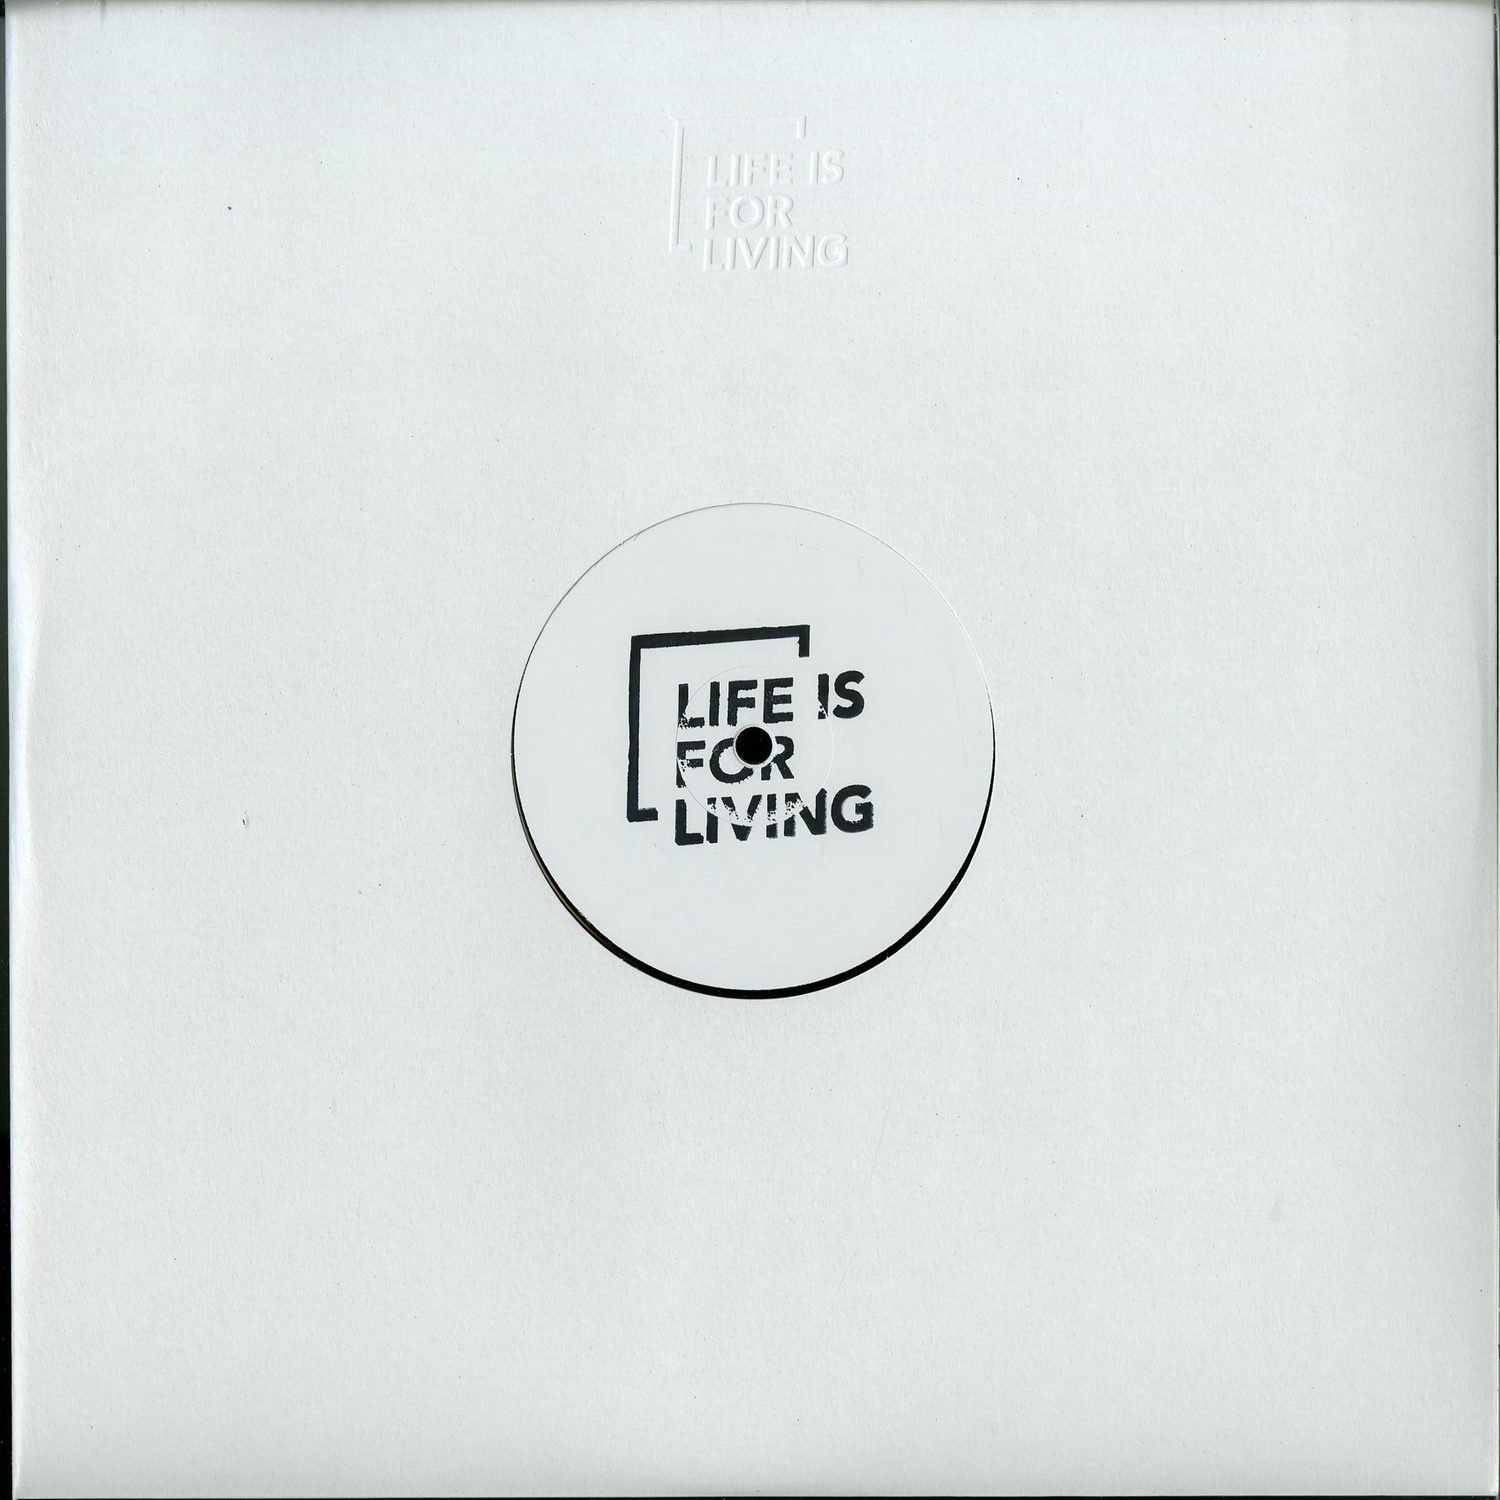 Shy Time - LIFE IS FOR LIVING 3